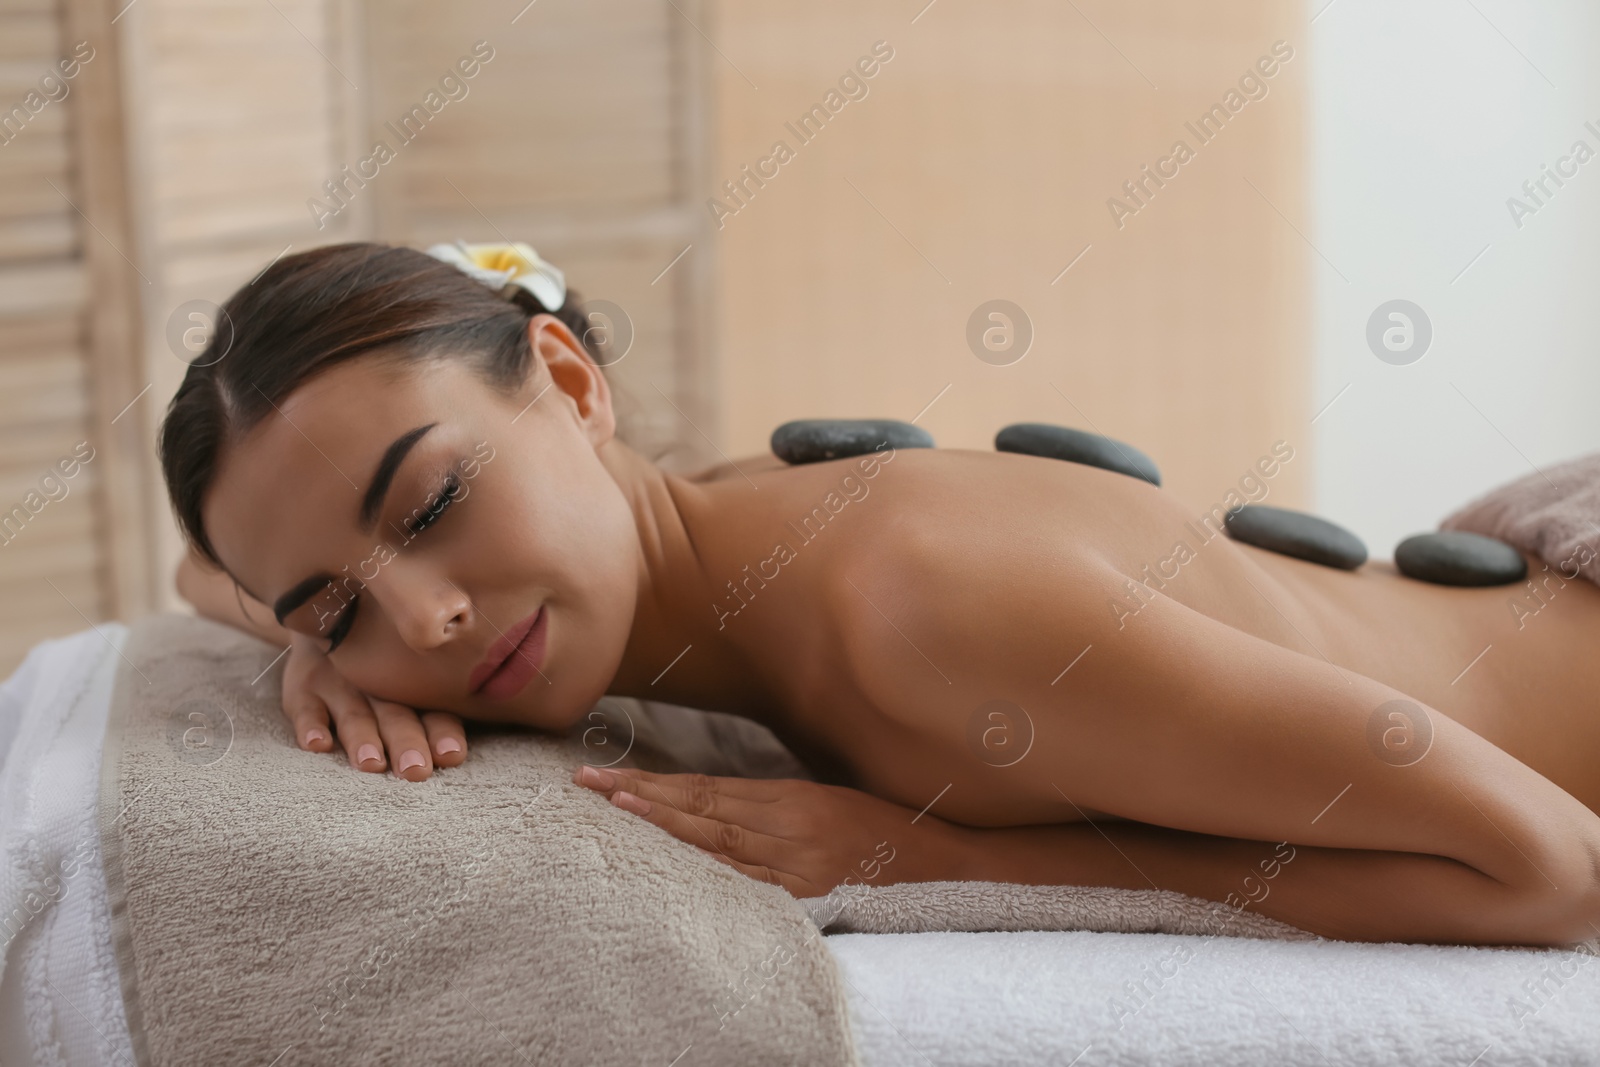 Photo of Beautiful young woman getting hot stone massage in spa salon